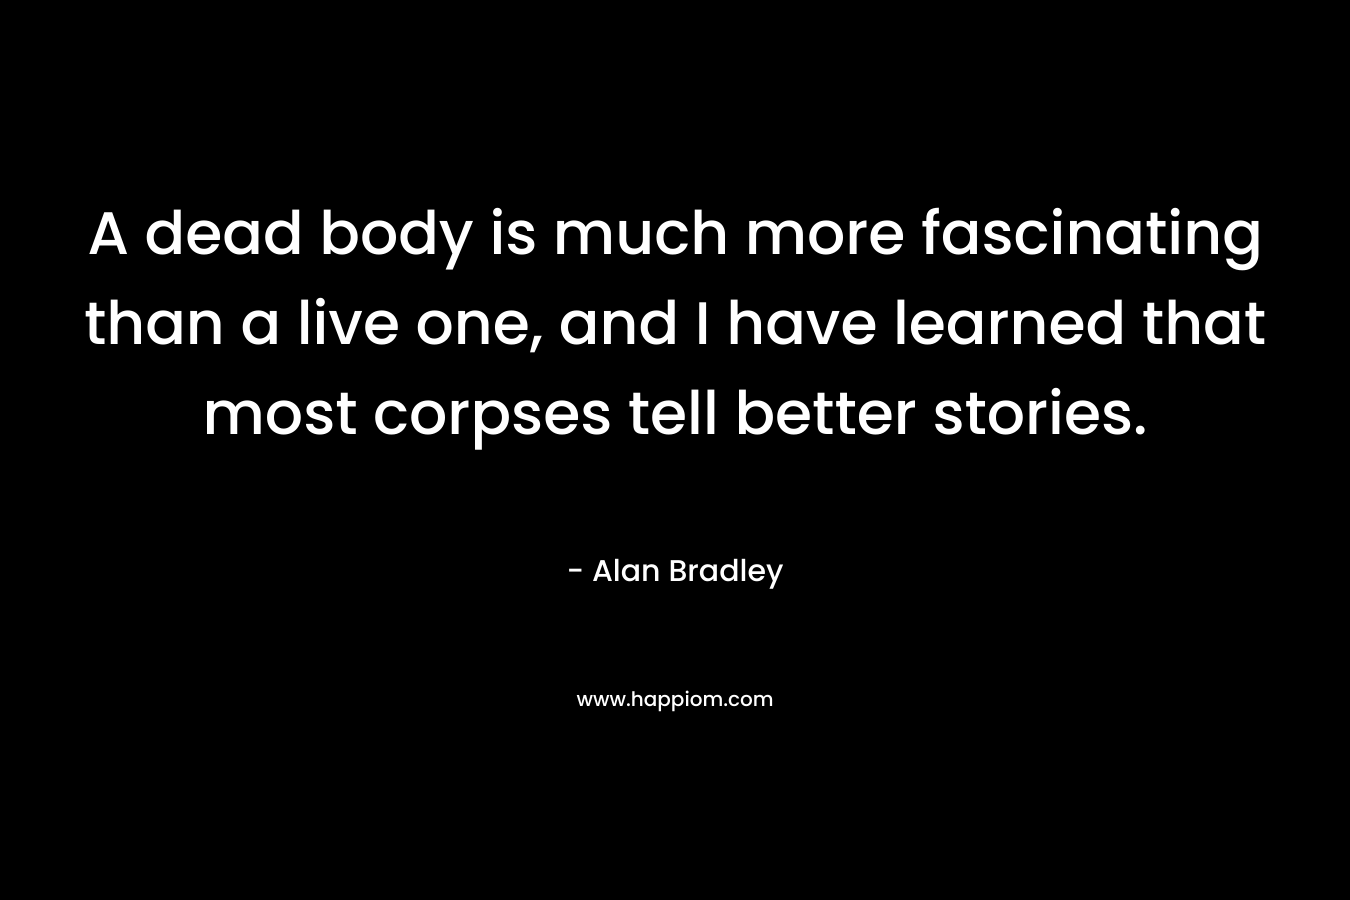 A dead body is much more fascinating than a live one, and I have learned that most corpses tell better stories. – Alan Bradley